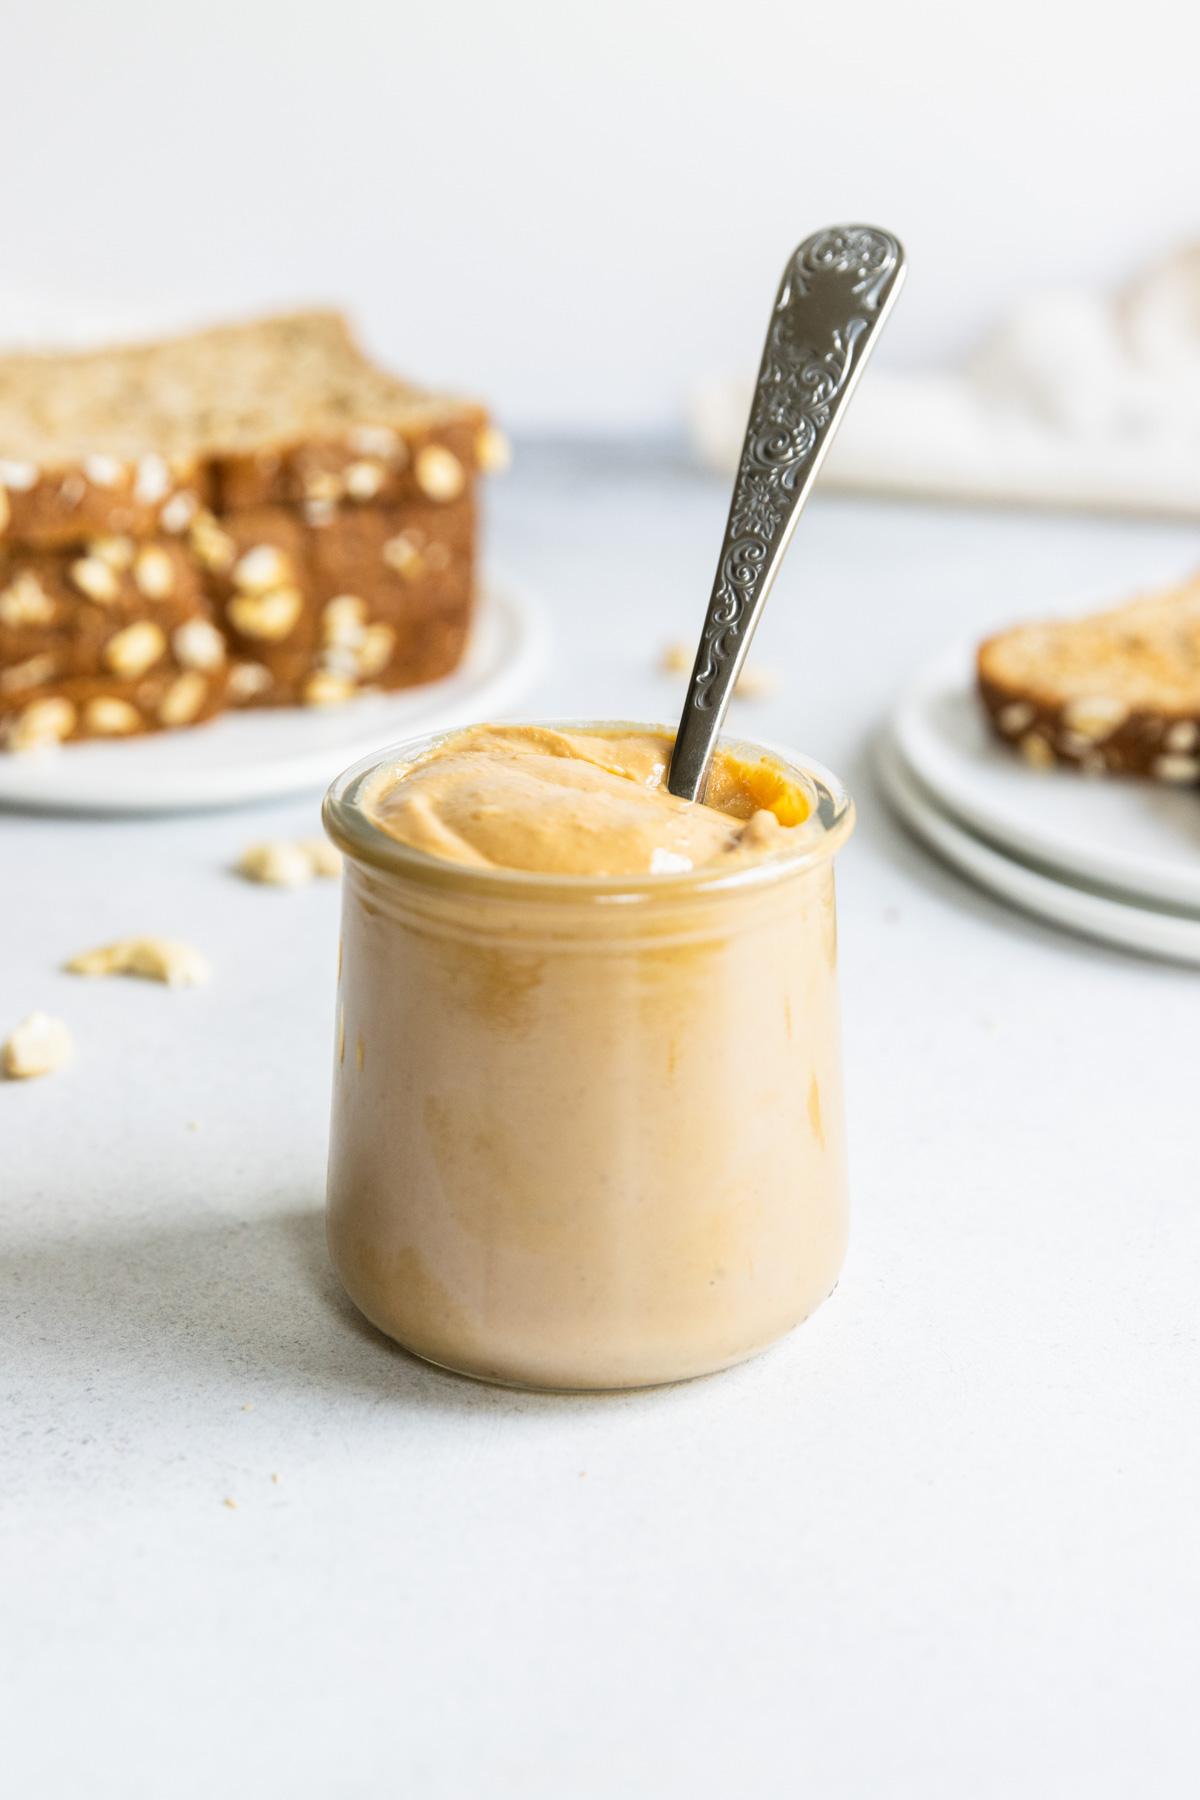 Homemade cashew butter in a glass jar with a spoon